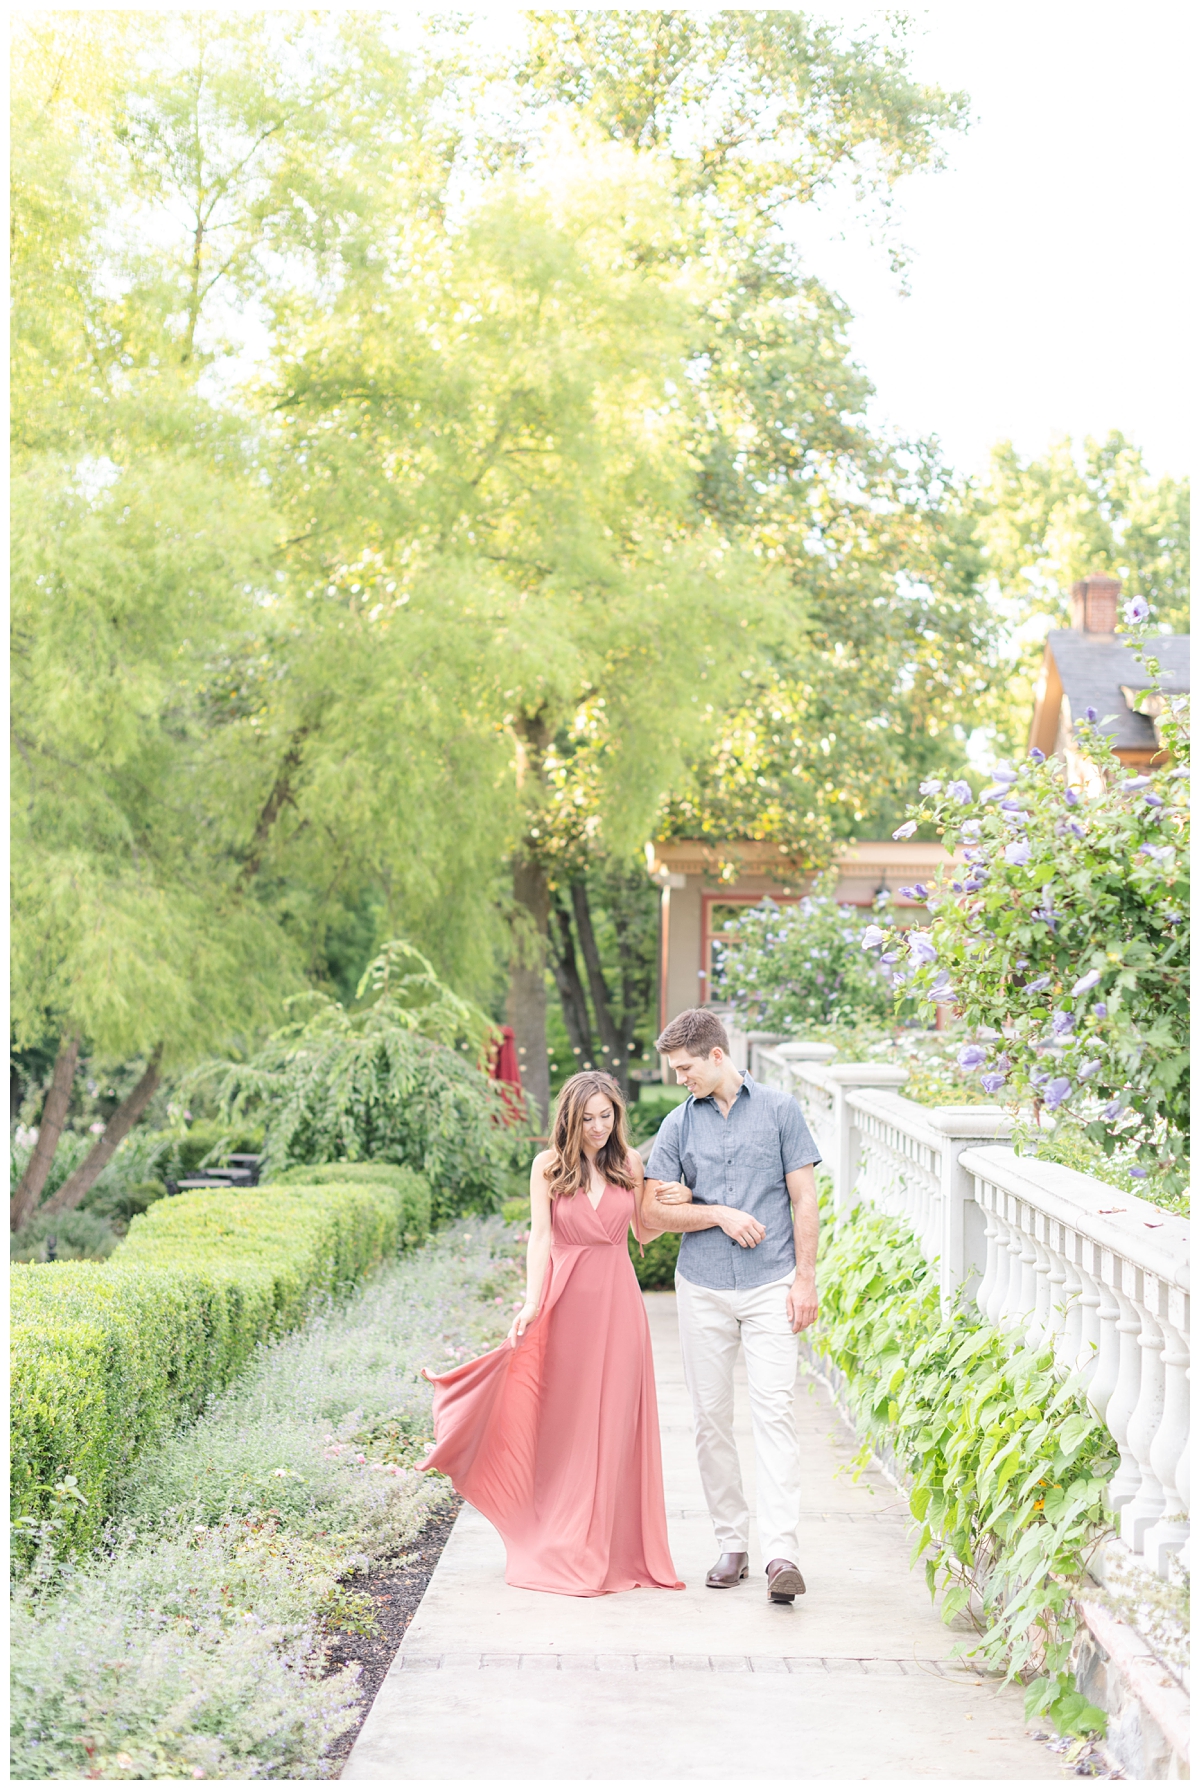 Tips for engagement session